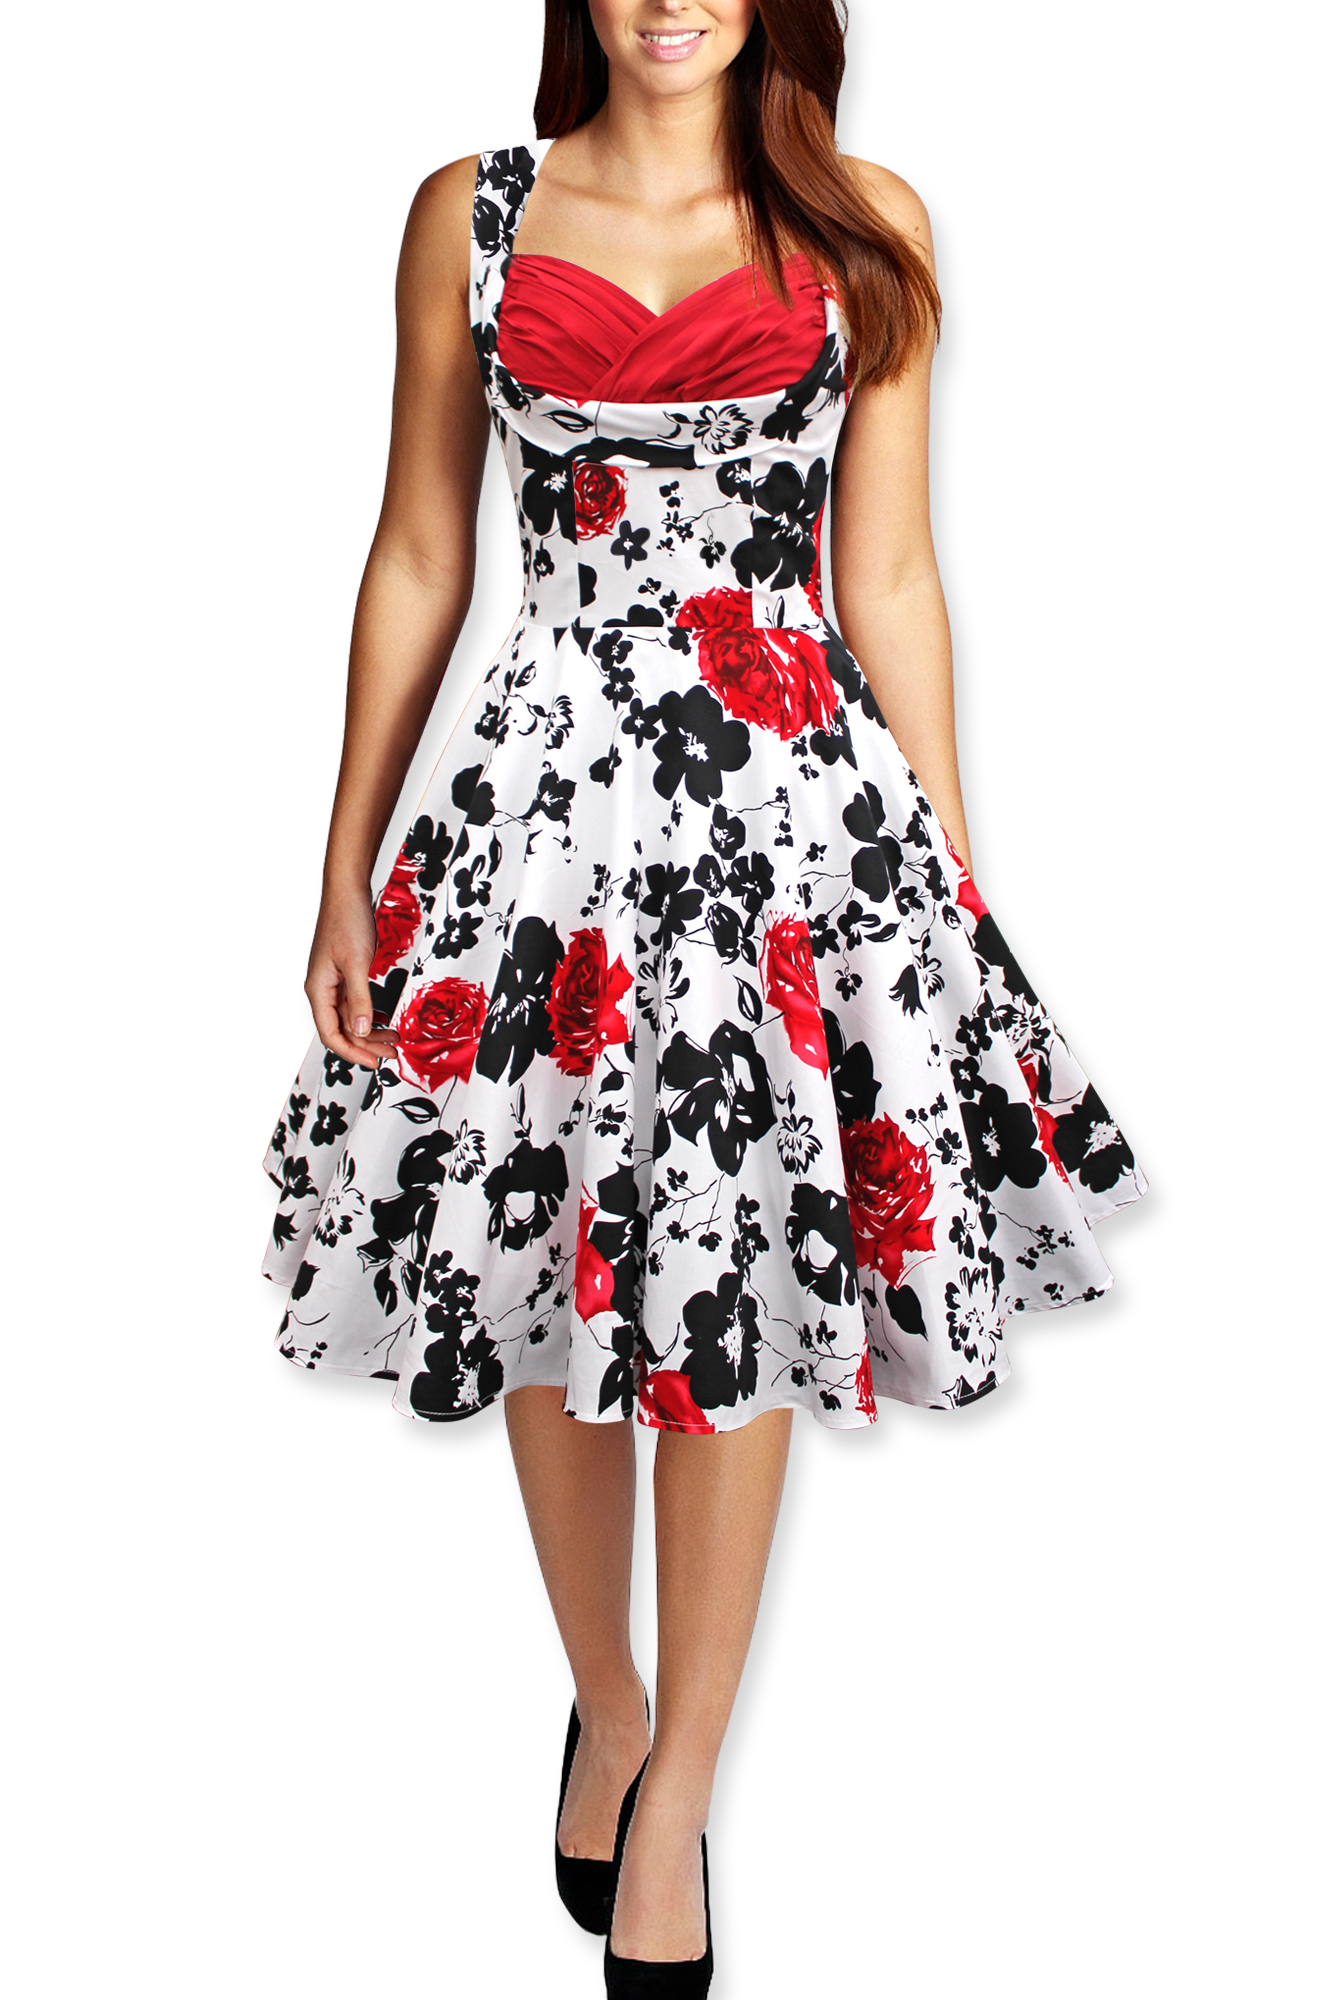 CLASSIC VINTAGE STYLE 1950's FULL CIRCLE ROCKABILLY SWING ...